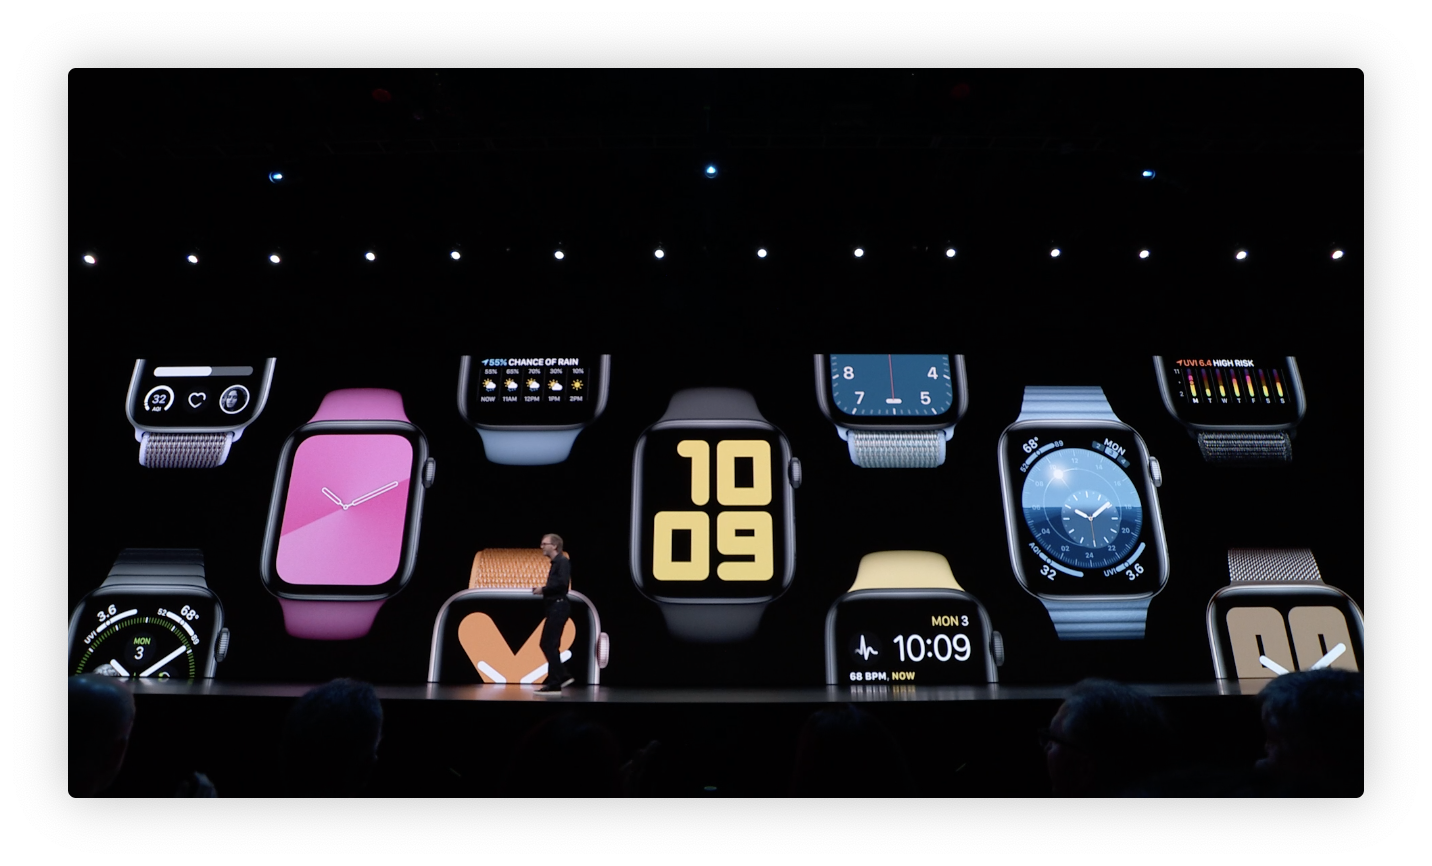 New watchOS 6 dials will be exclusive to Apple Watches Series 4